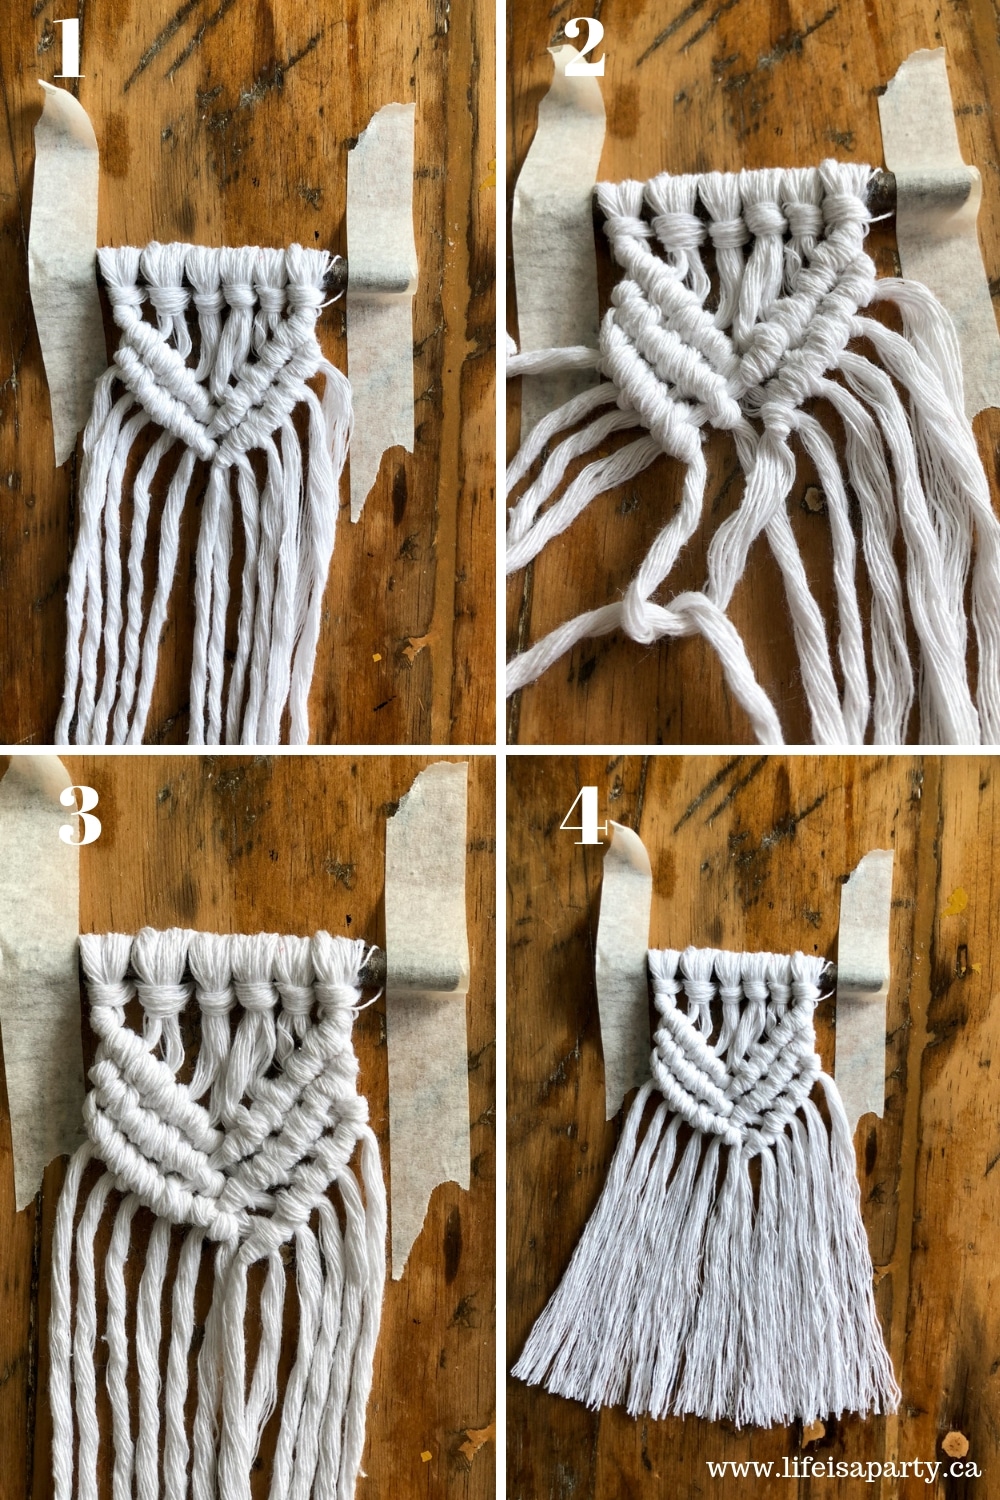 Mini Macrame Christmas Ornaments - Life is a Party